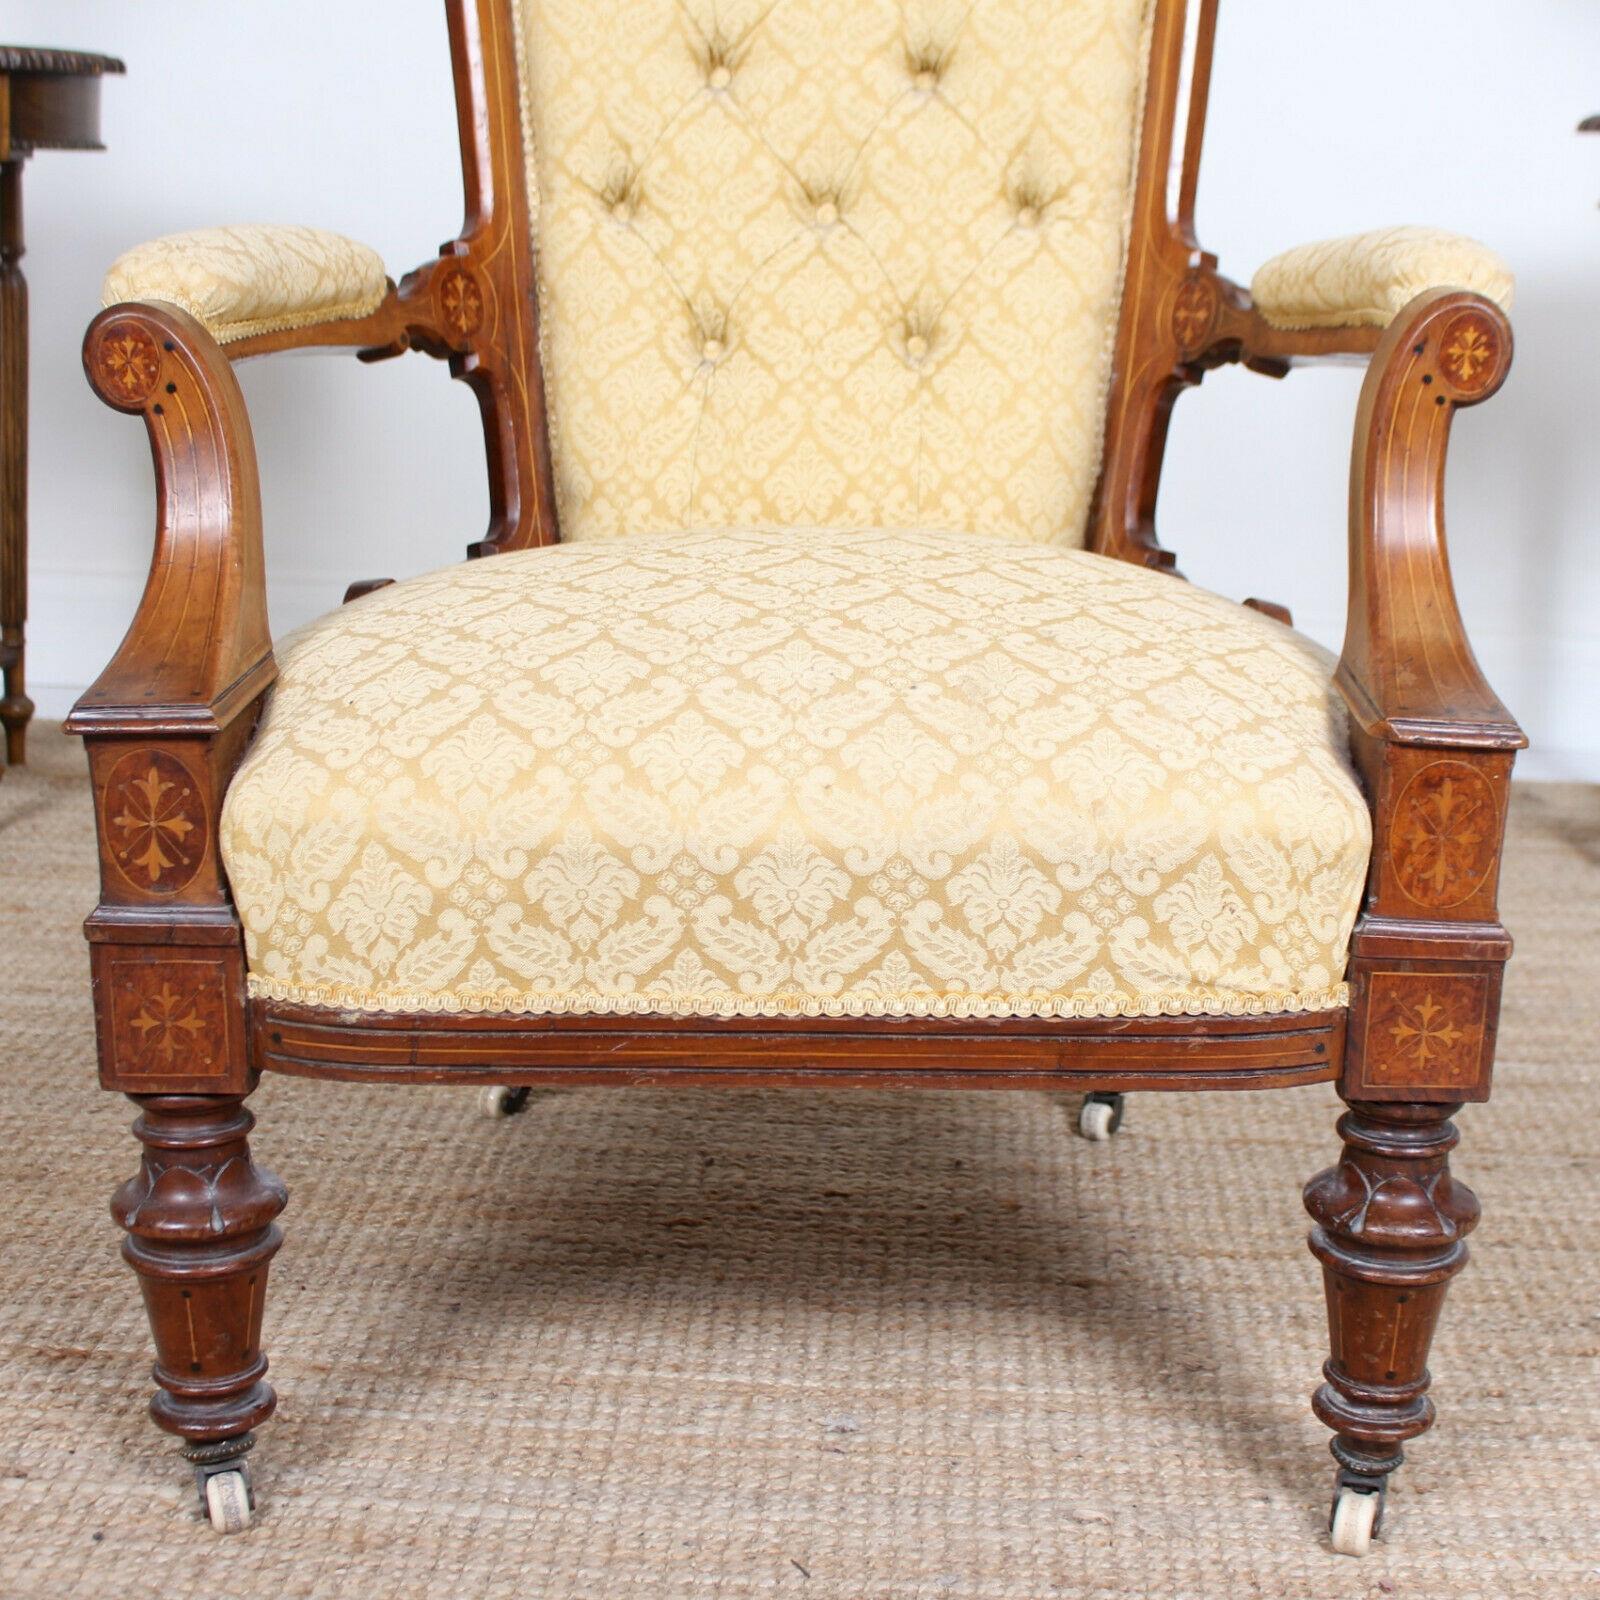 English Inlaid Walnut Armchair 19th Century Lounge Chair For Sale 7